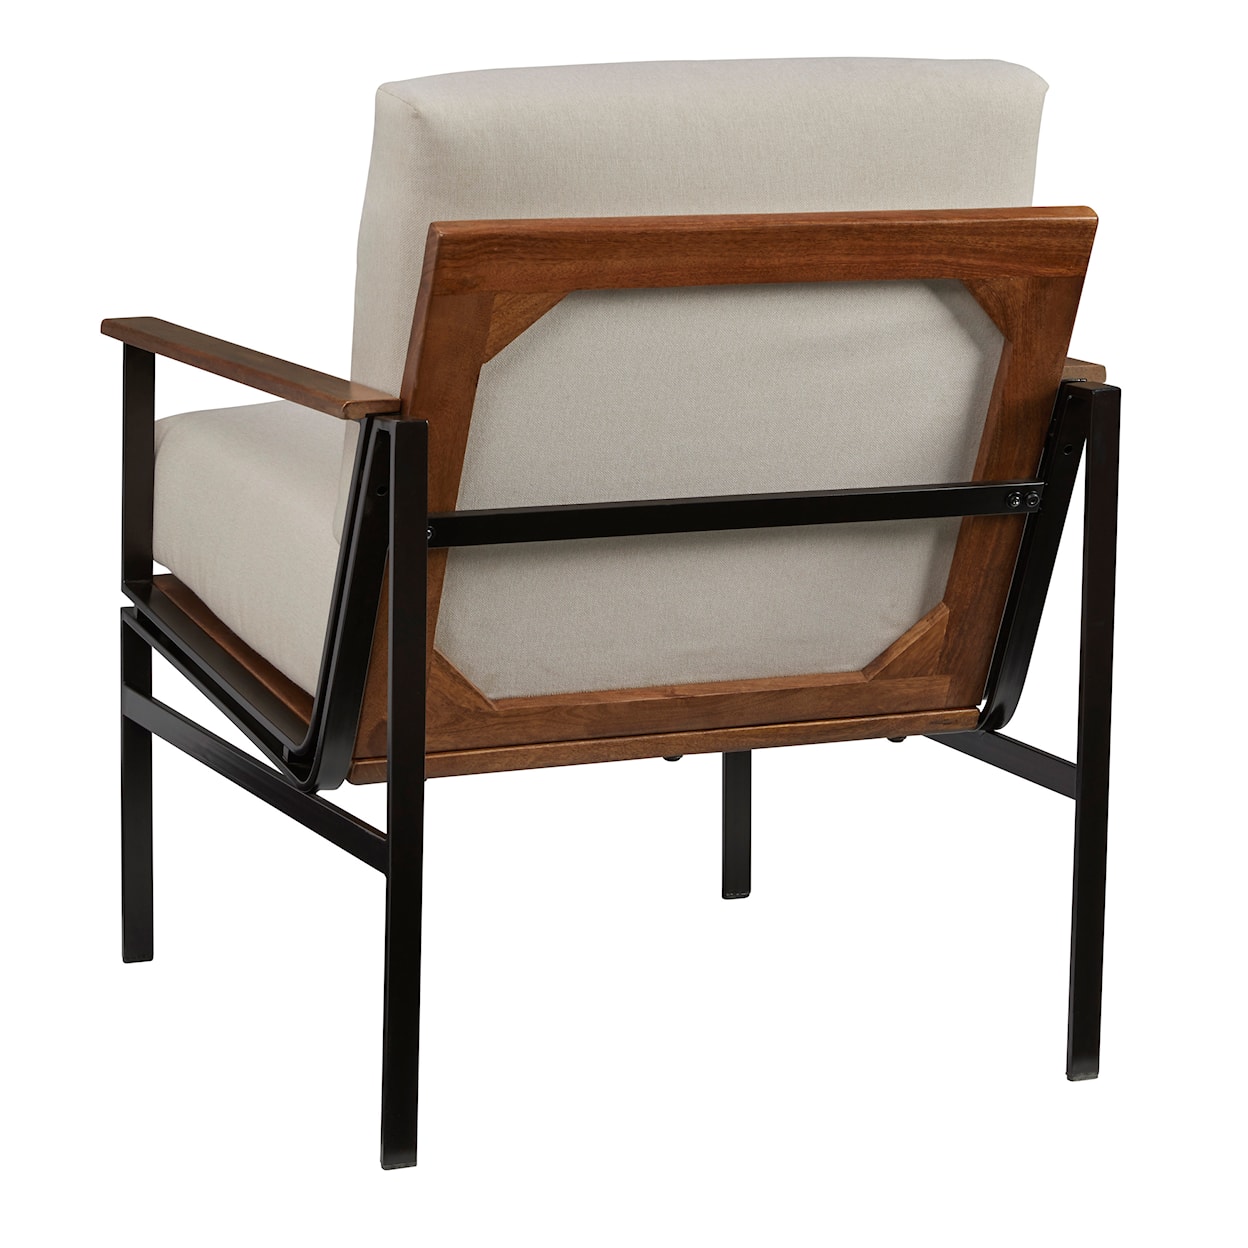 Signature Design by Ashley Furniture Tilden Accent Chair